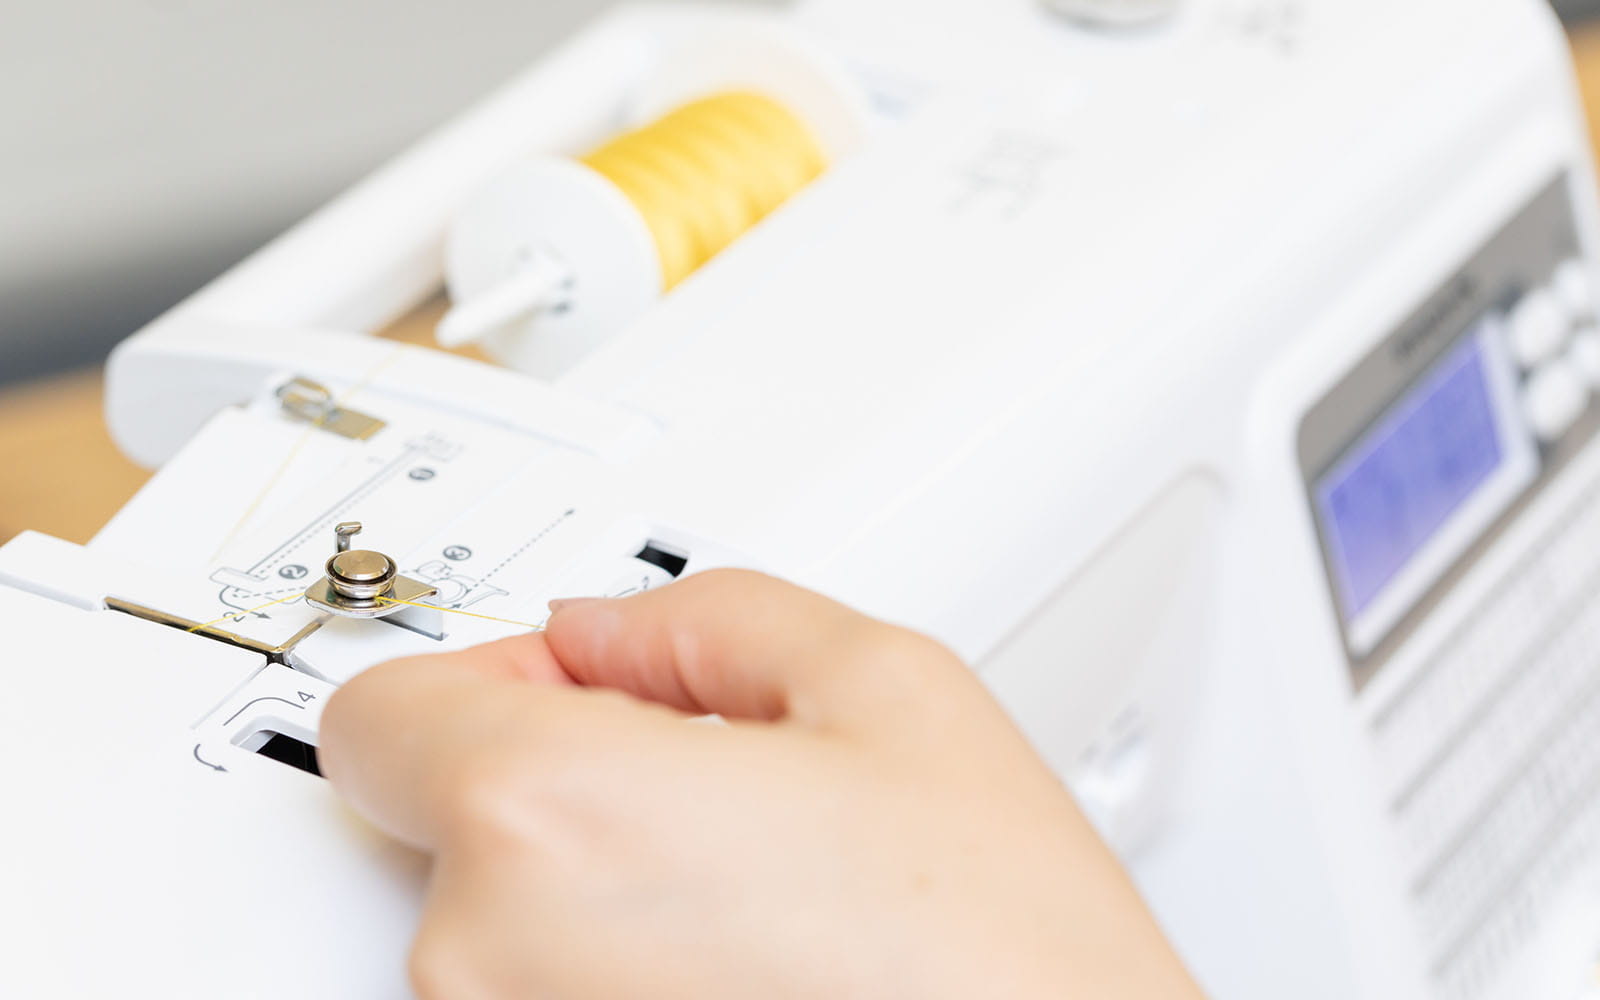 Threading yellow thread into Brother sewing machine